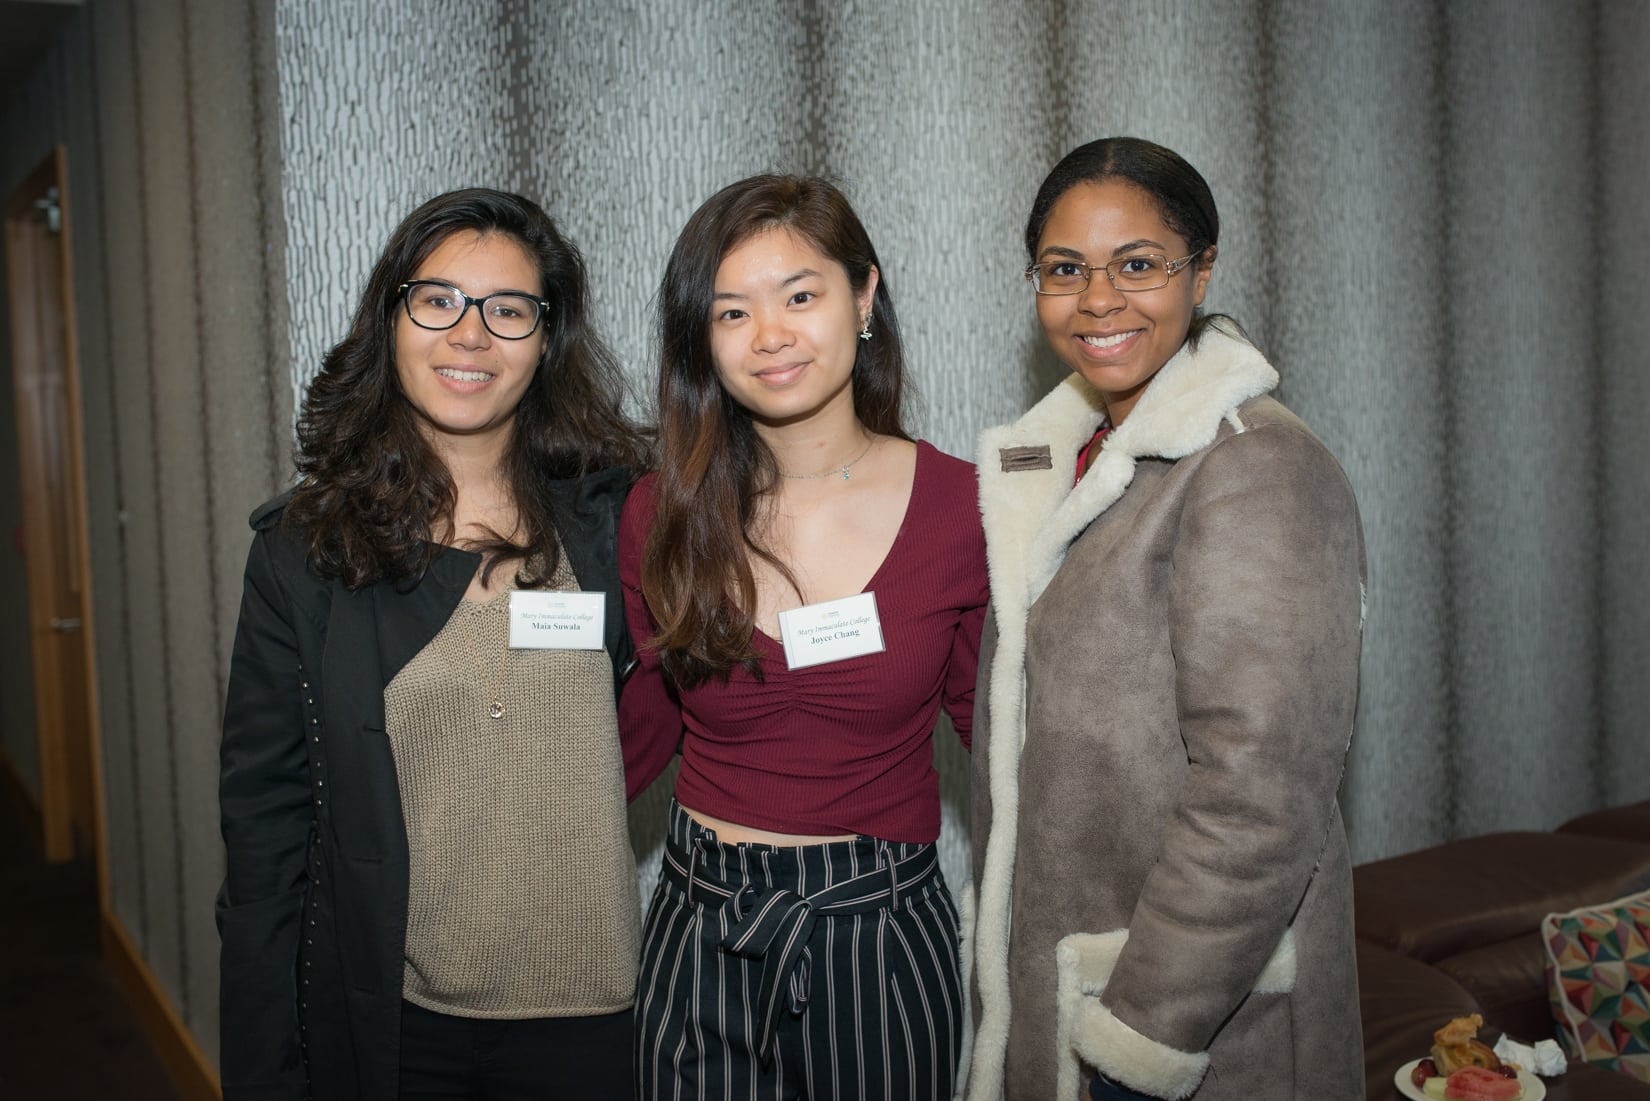 No repro fee-Business Excellence Seminar: Wealth Management. Event sponsored by AIB- 11-09-2018, From Left to Right:Maia Suwala, Joyce Chang and Maribel Maignan  all from Mary Immaculate College
Photo credit Shauna Kennedy